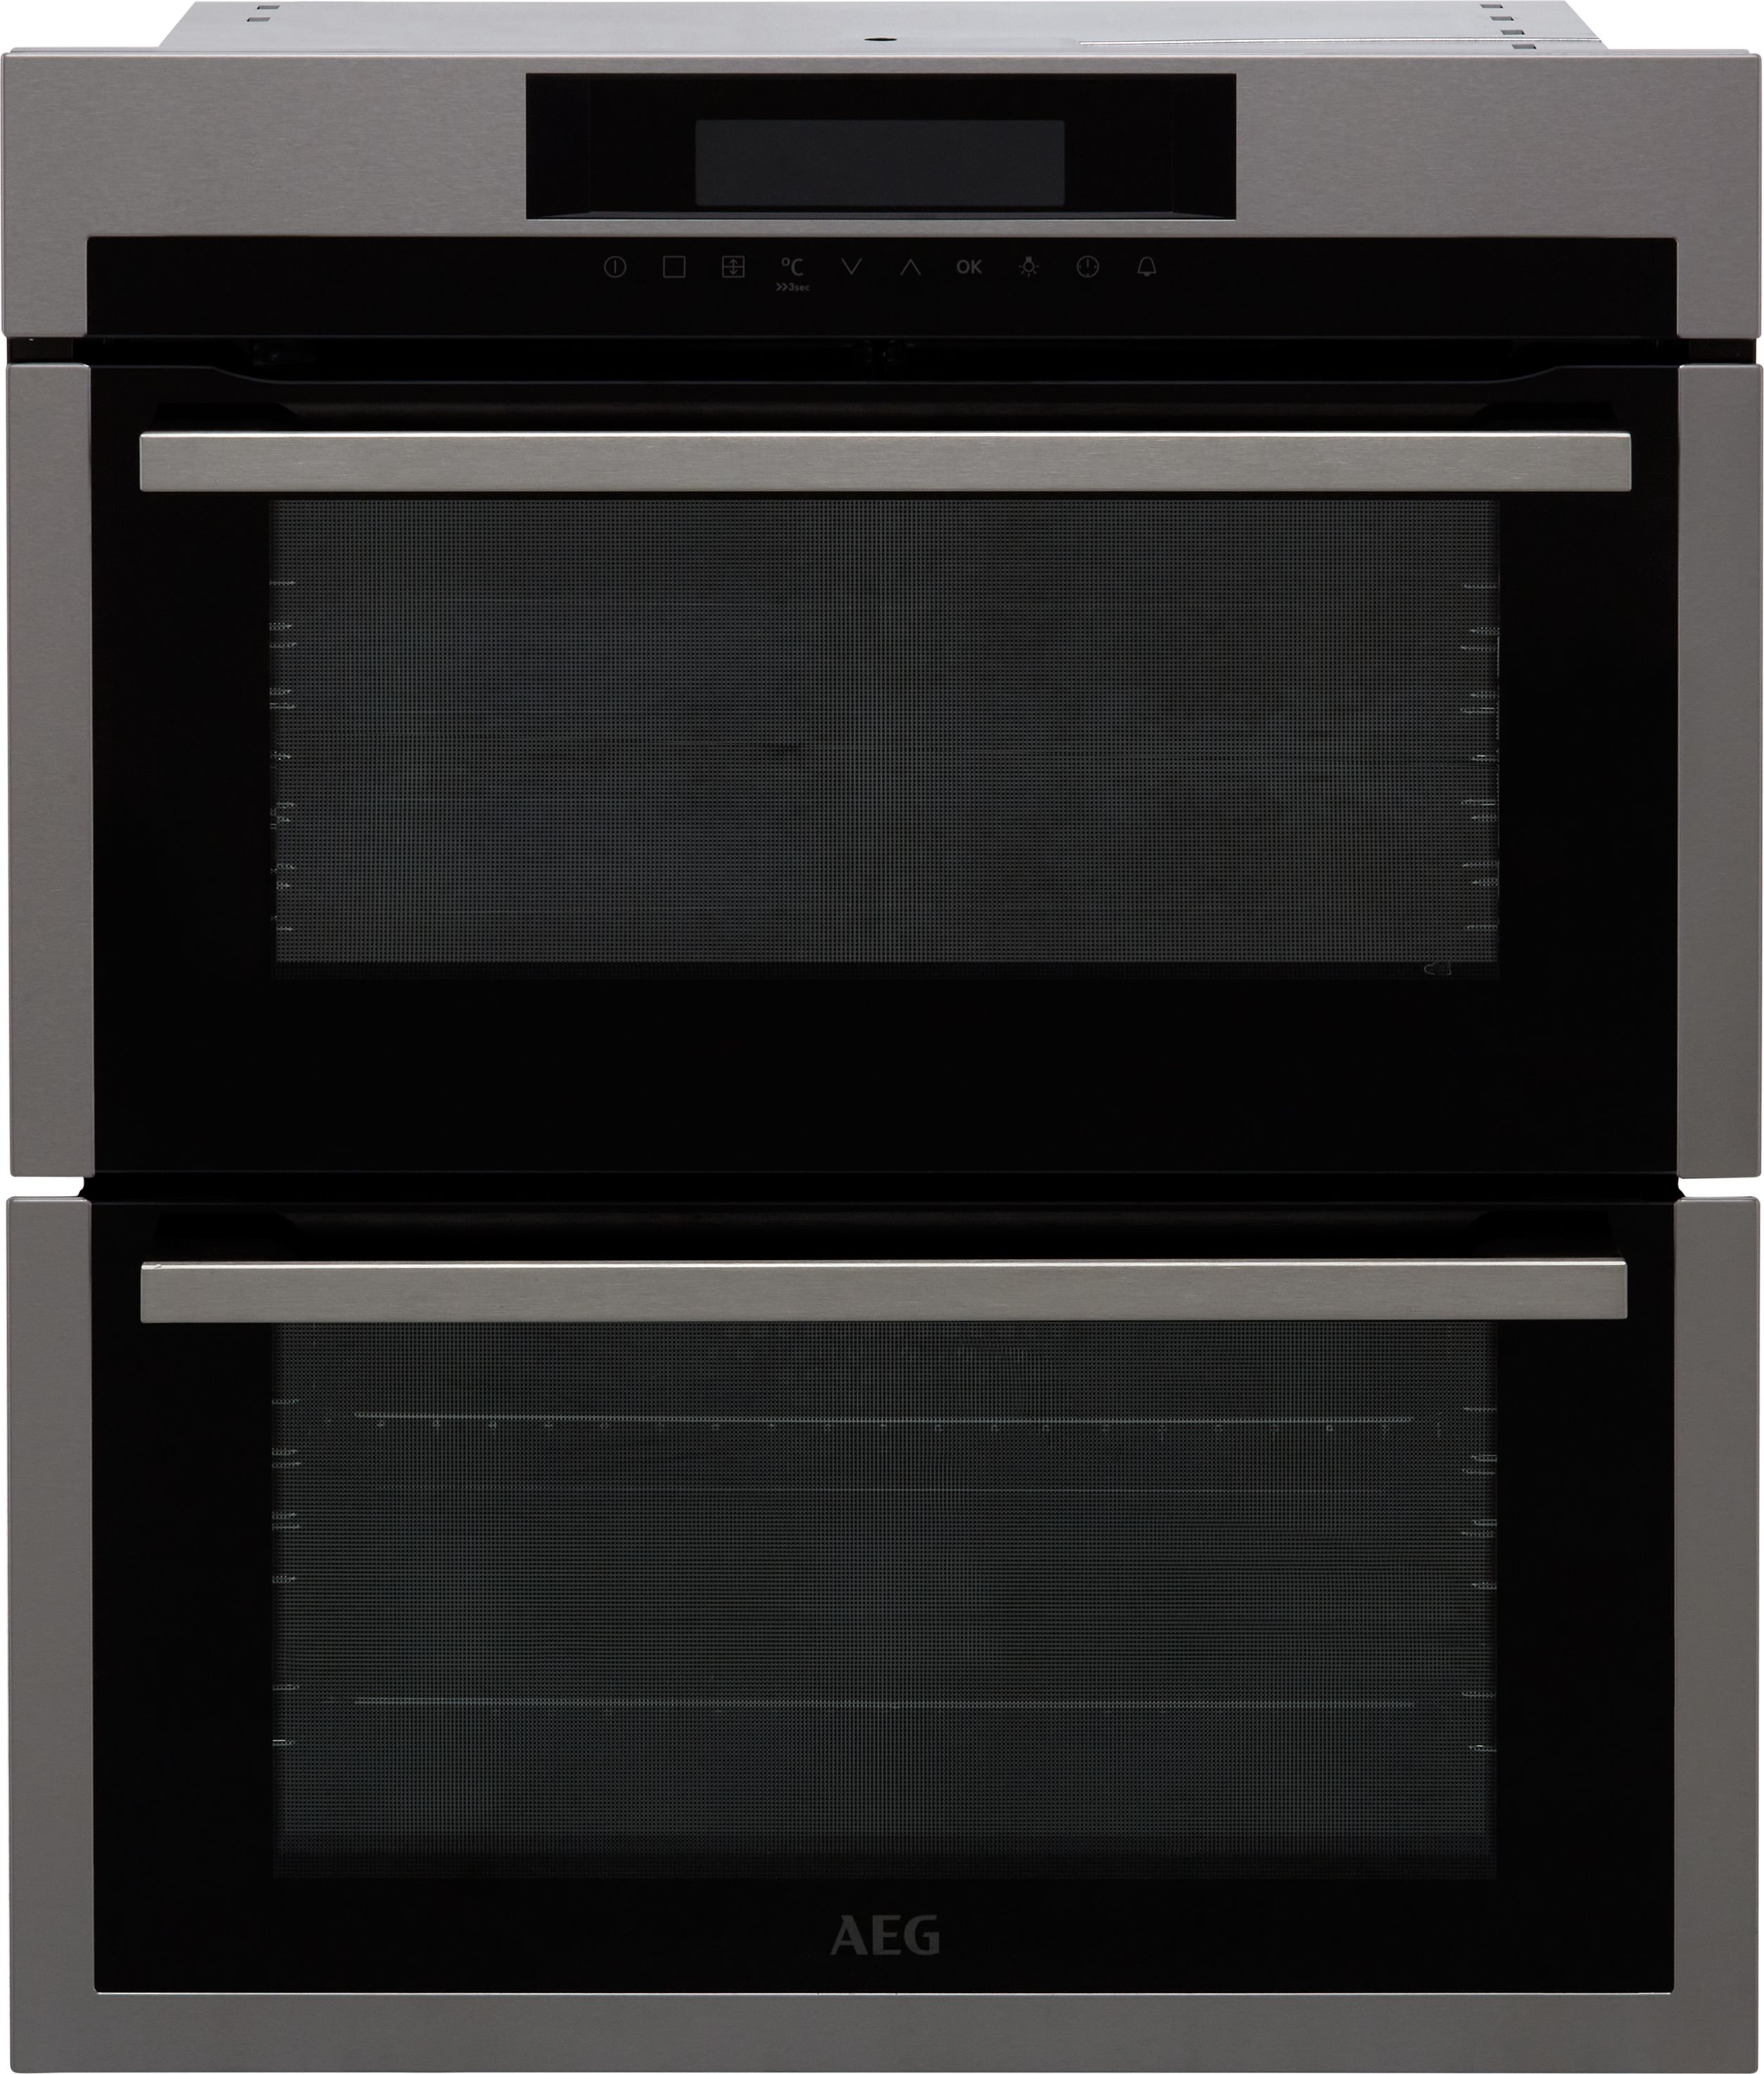 AEG DUE731110M Built Under Electric Double Oven - Stainless Steel - AA Rated Stainless Steel